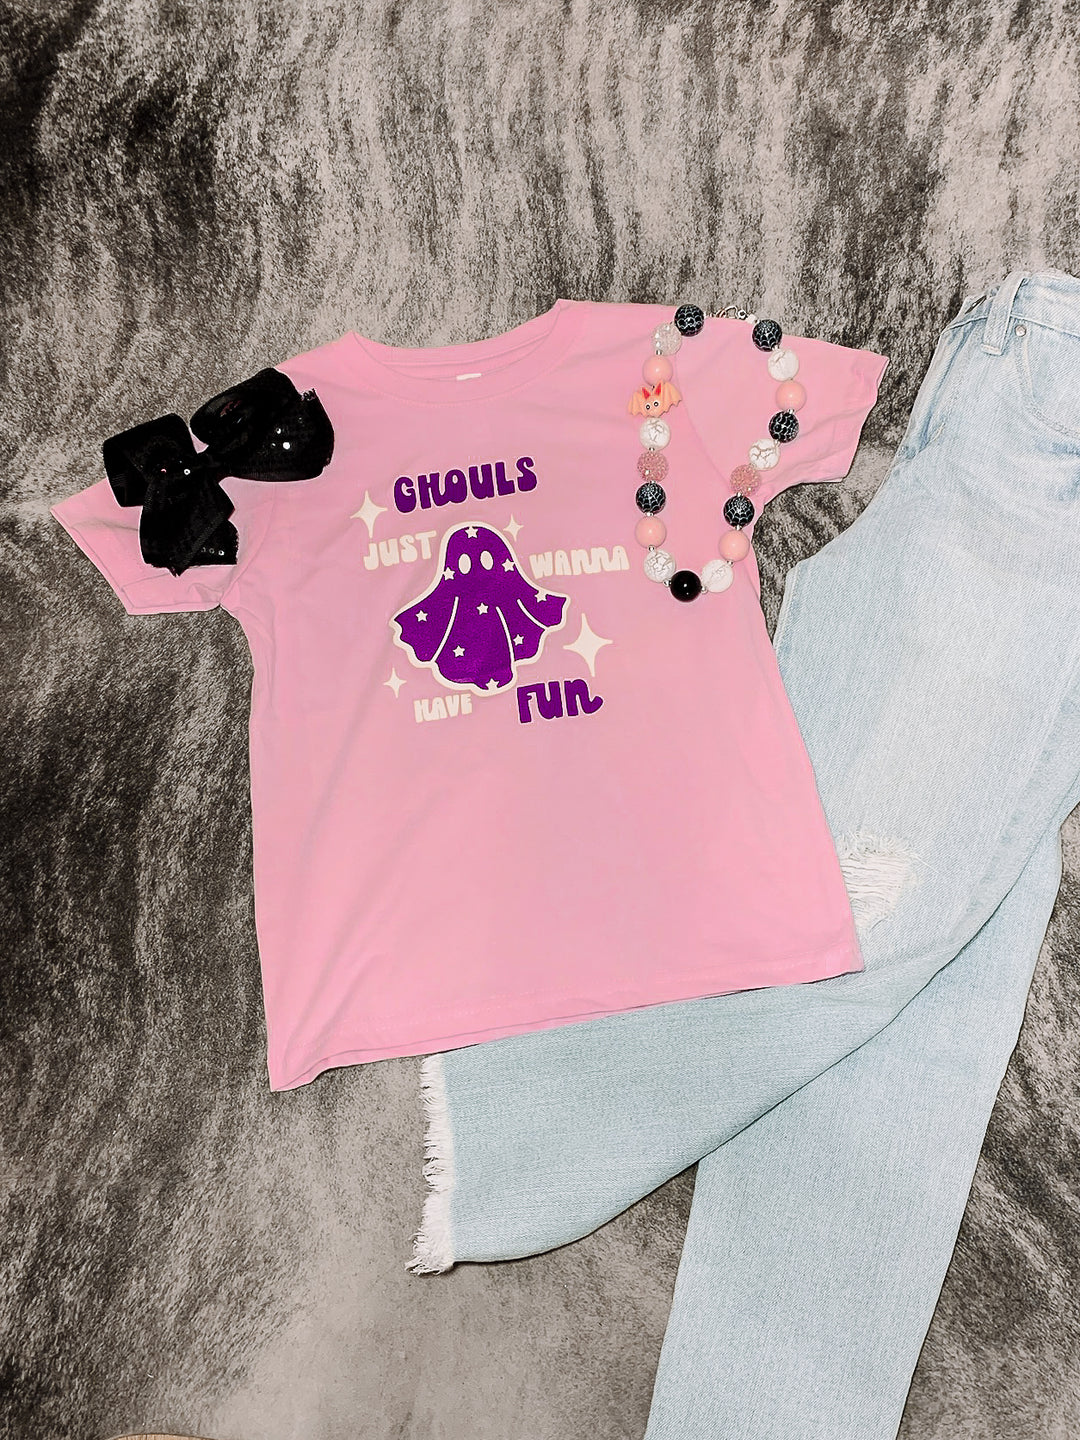 Pink Ghouls Just Wanna Have Fun Kids Tee